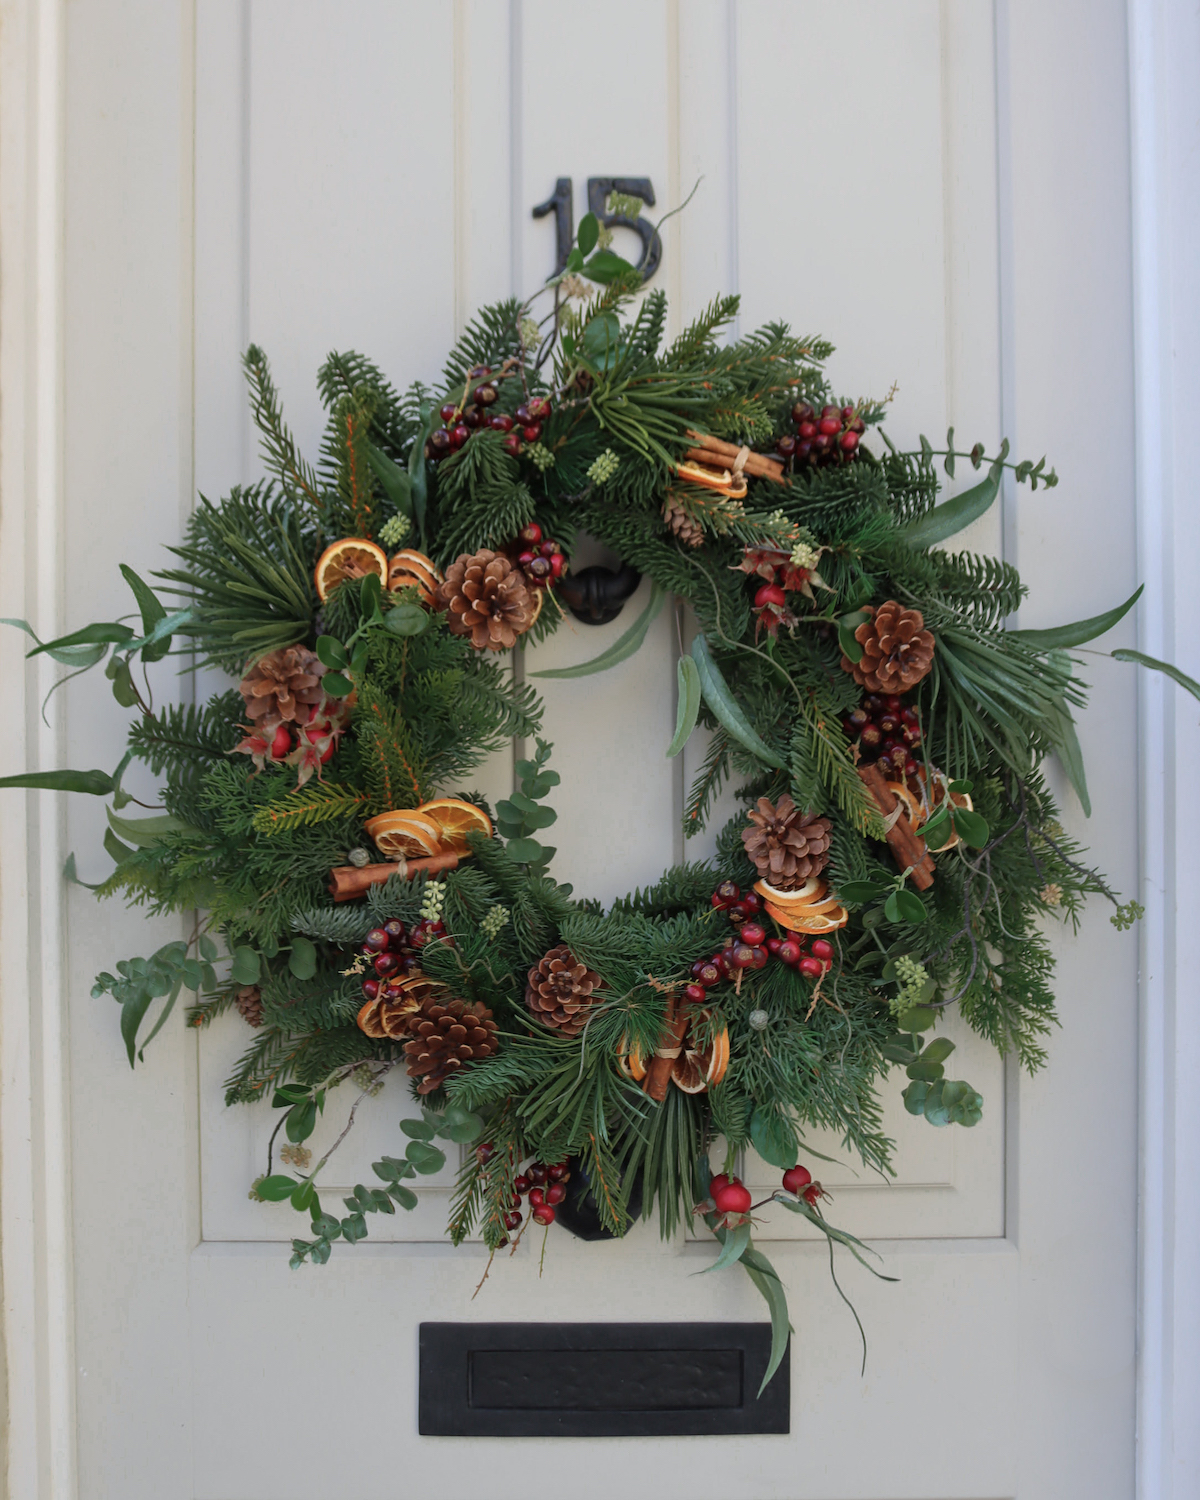 How to hang a wreath on a front door without making holes | Livingetc